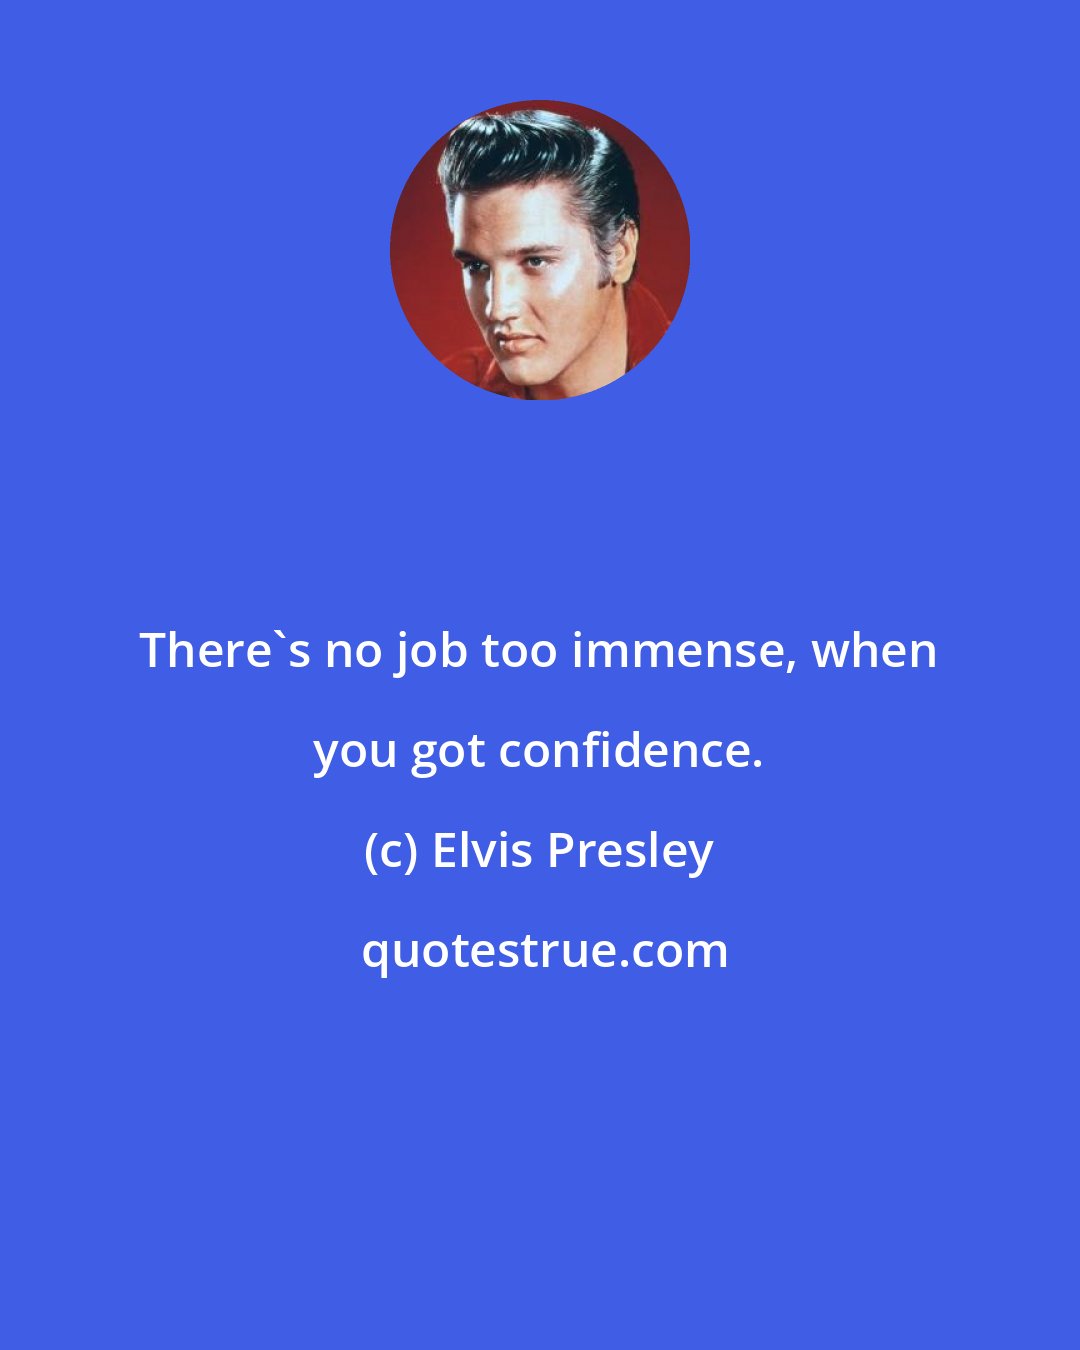 Elvis Presley: There's no job too immense, when you got confidence.